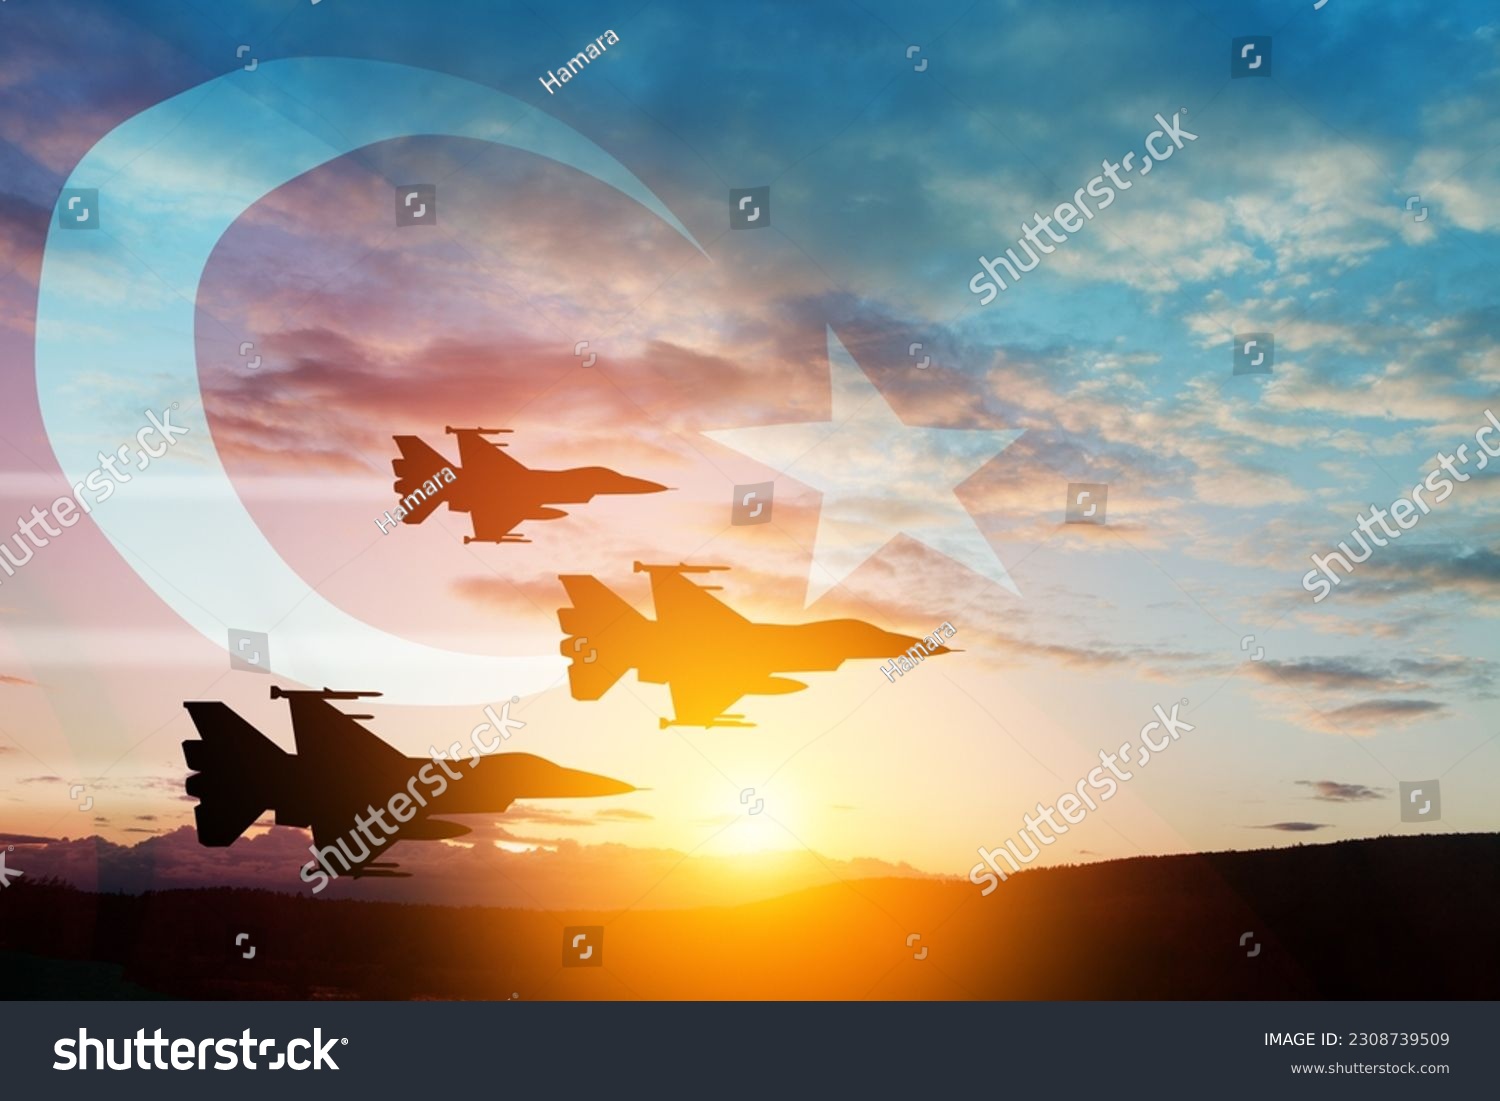 Aircraft silhouettes on background of sunset with a transparent Turkey flag. Air Force aerobatic demonstration. Air Force Day. Turkish Air Force Foundation Day. #2308739509